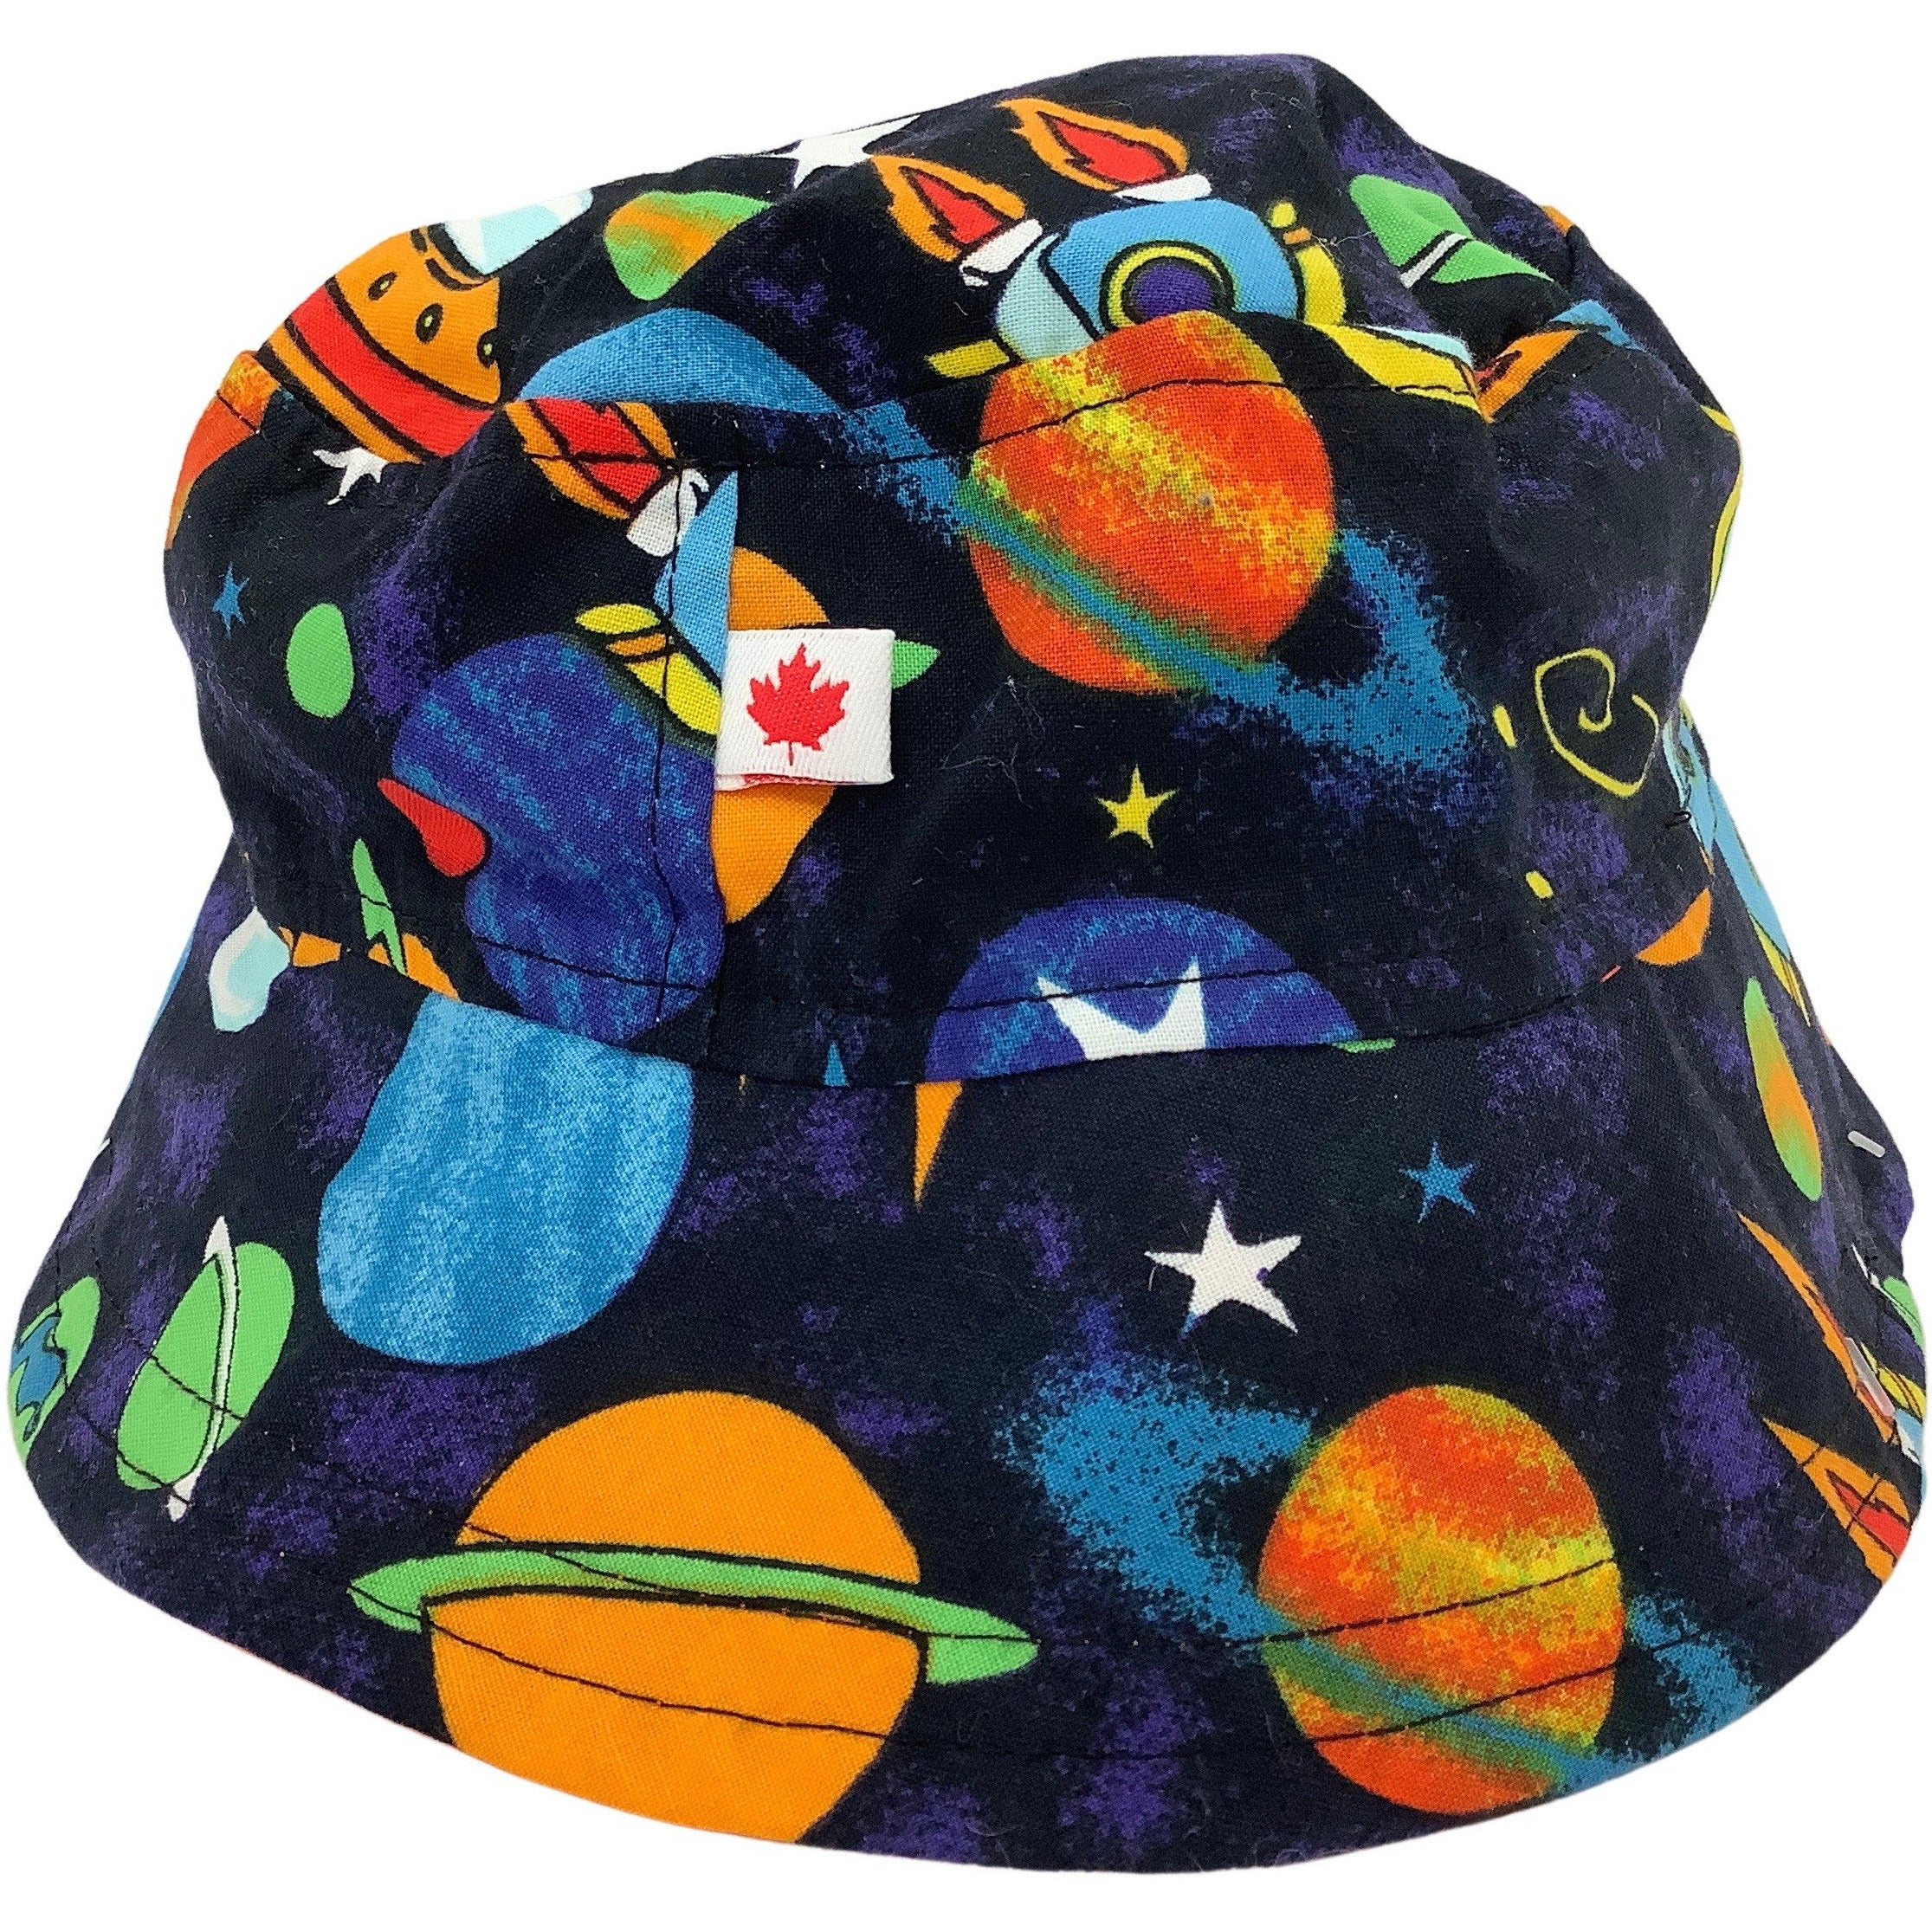 Snug As A Bug Children's Bucket Hat: Outer Space Theme: Various Sizes